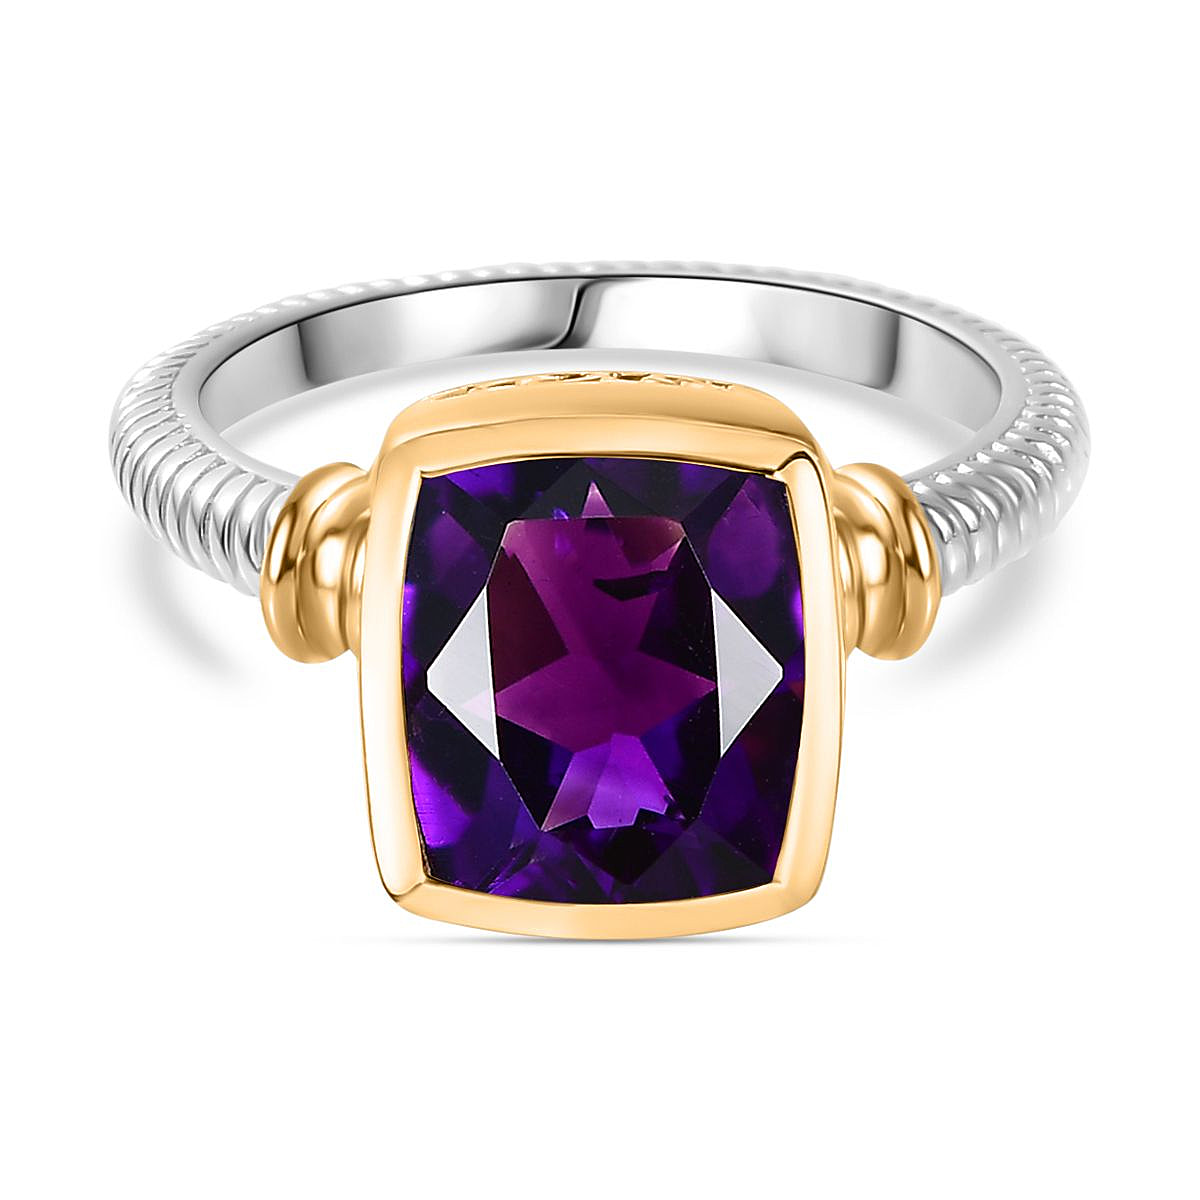 Moroccan Amethyst Solitaire Ring in 18K Yellow Gold Vermeil & Platinum Plated Sterling Silver 2.95 Ct.